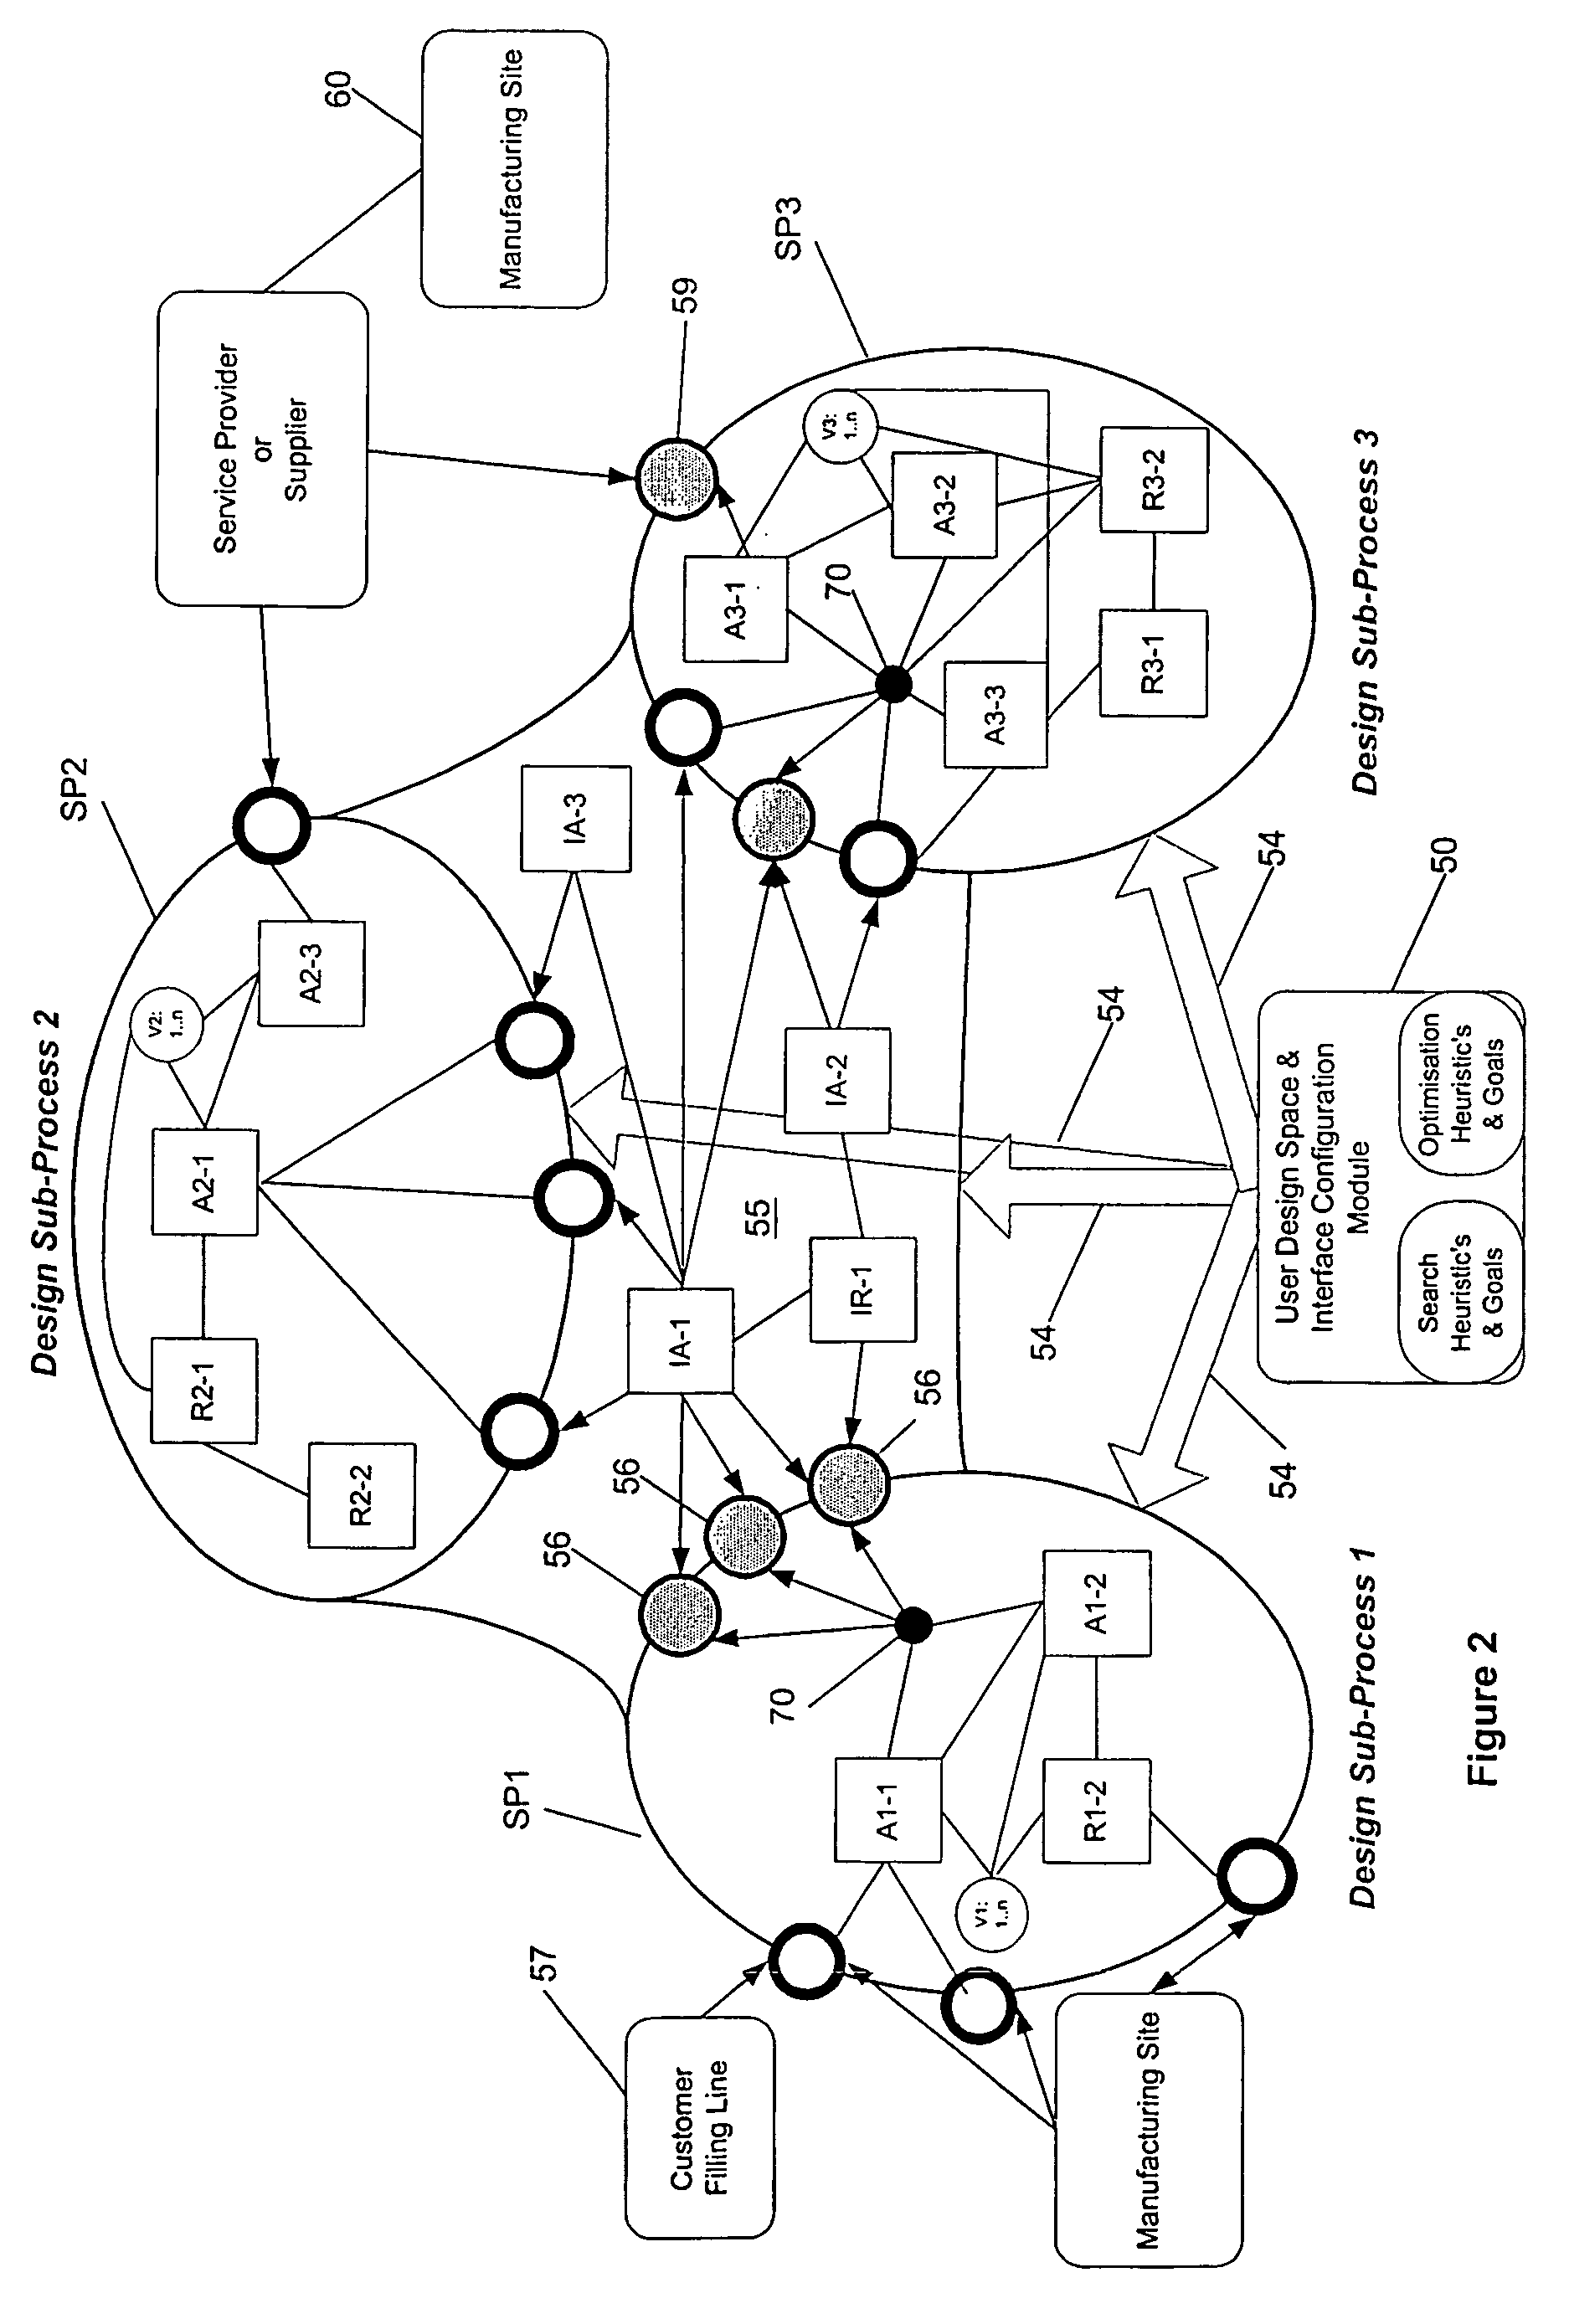 System and method for controlling a design process